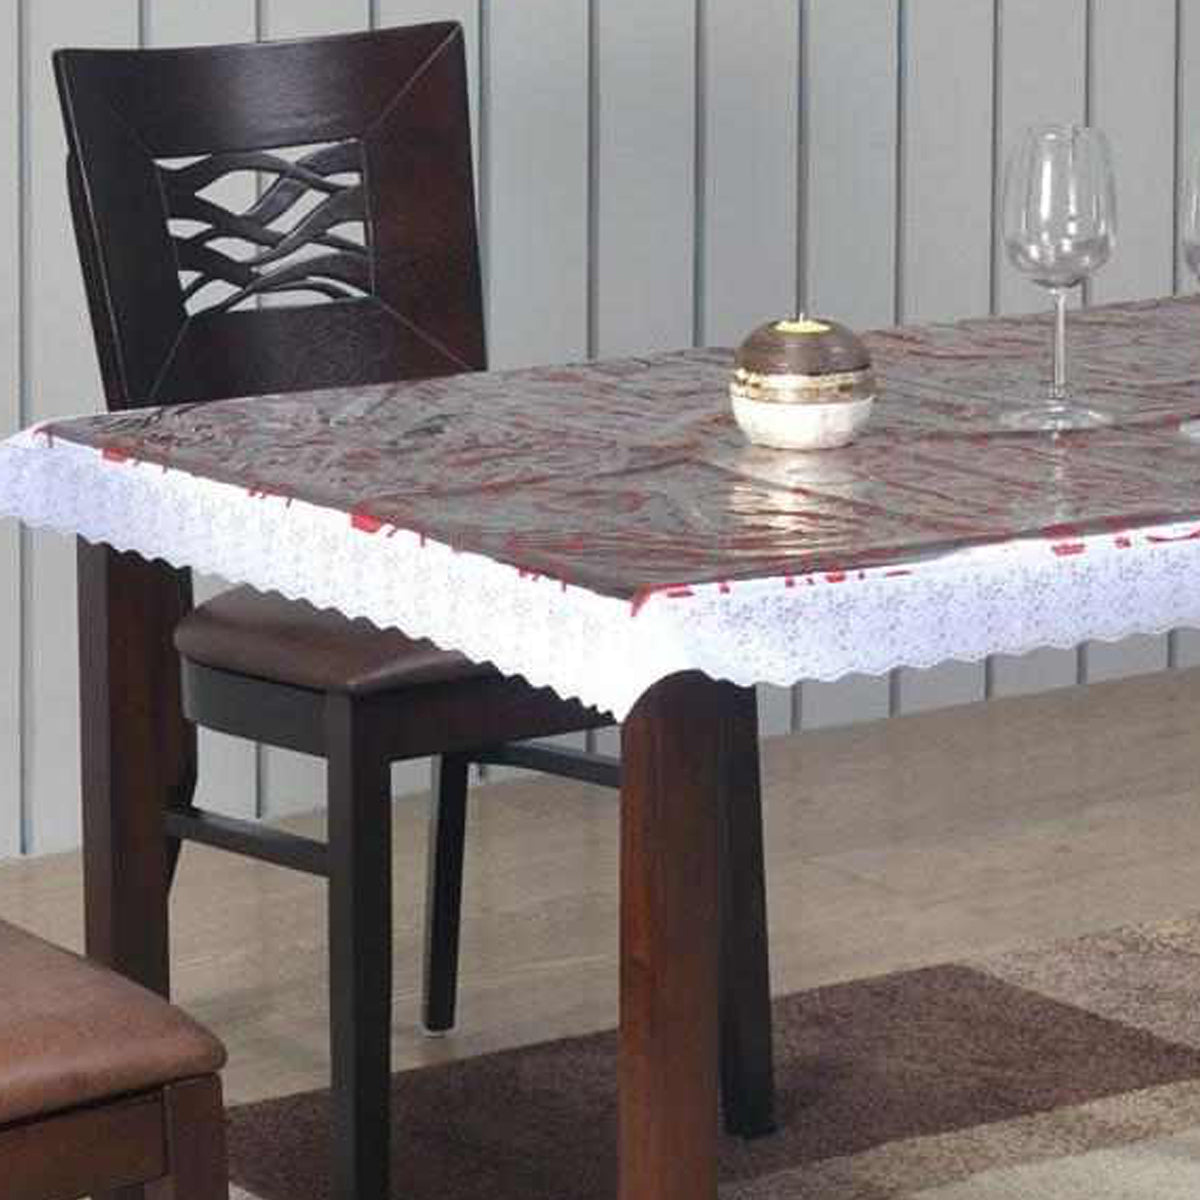 Aspen Printed with Lace 4 Seater Table Cover (Silver)